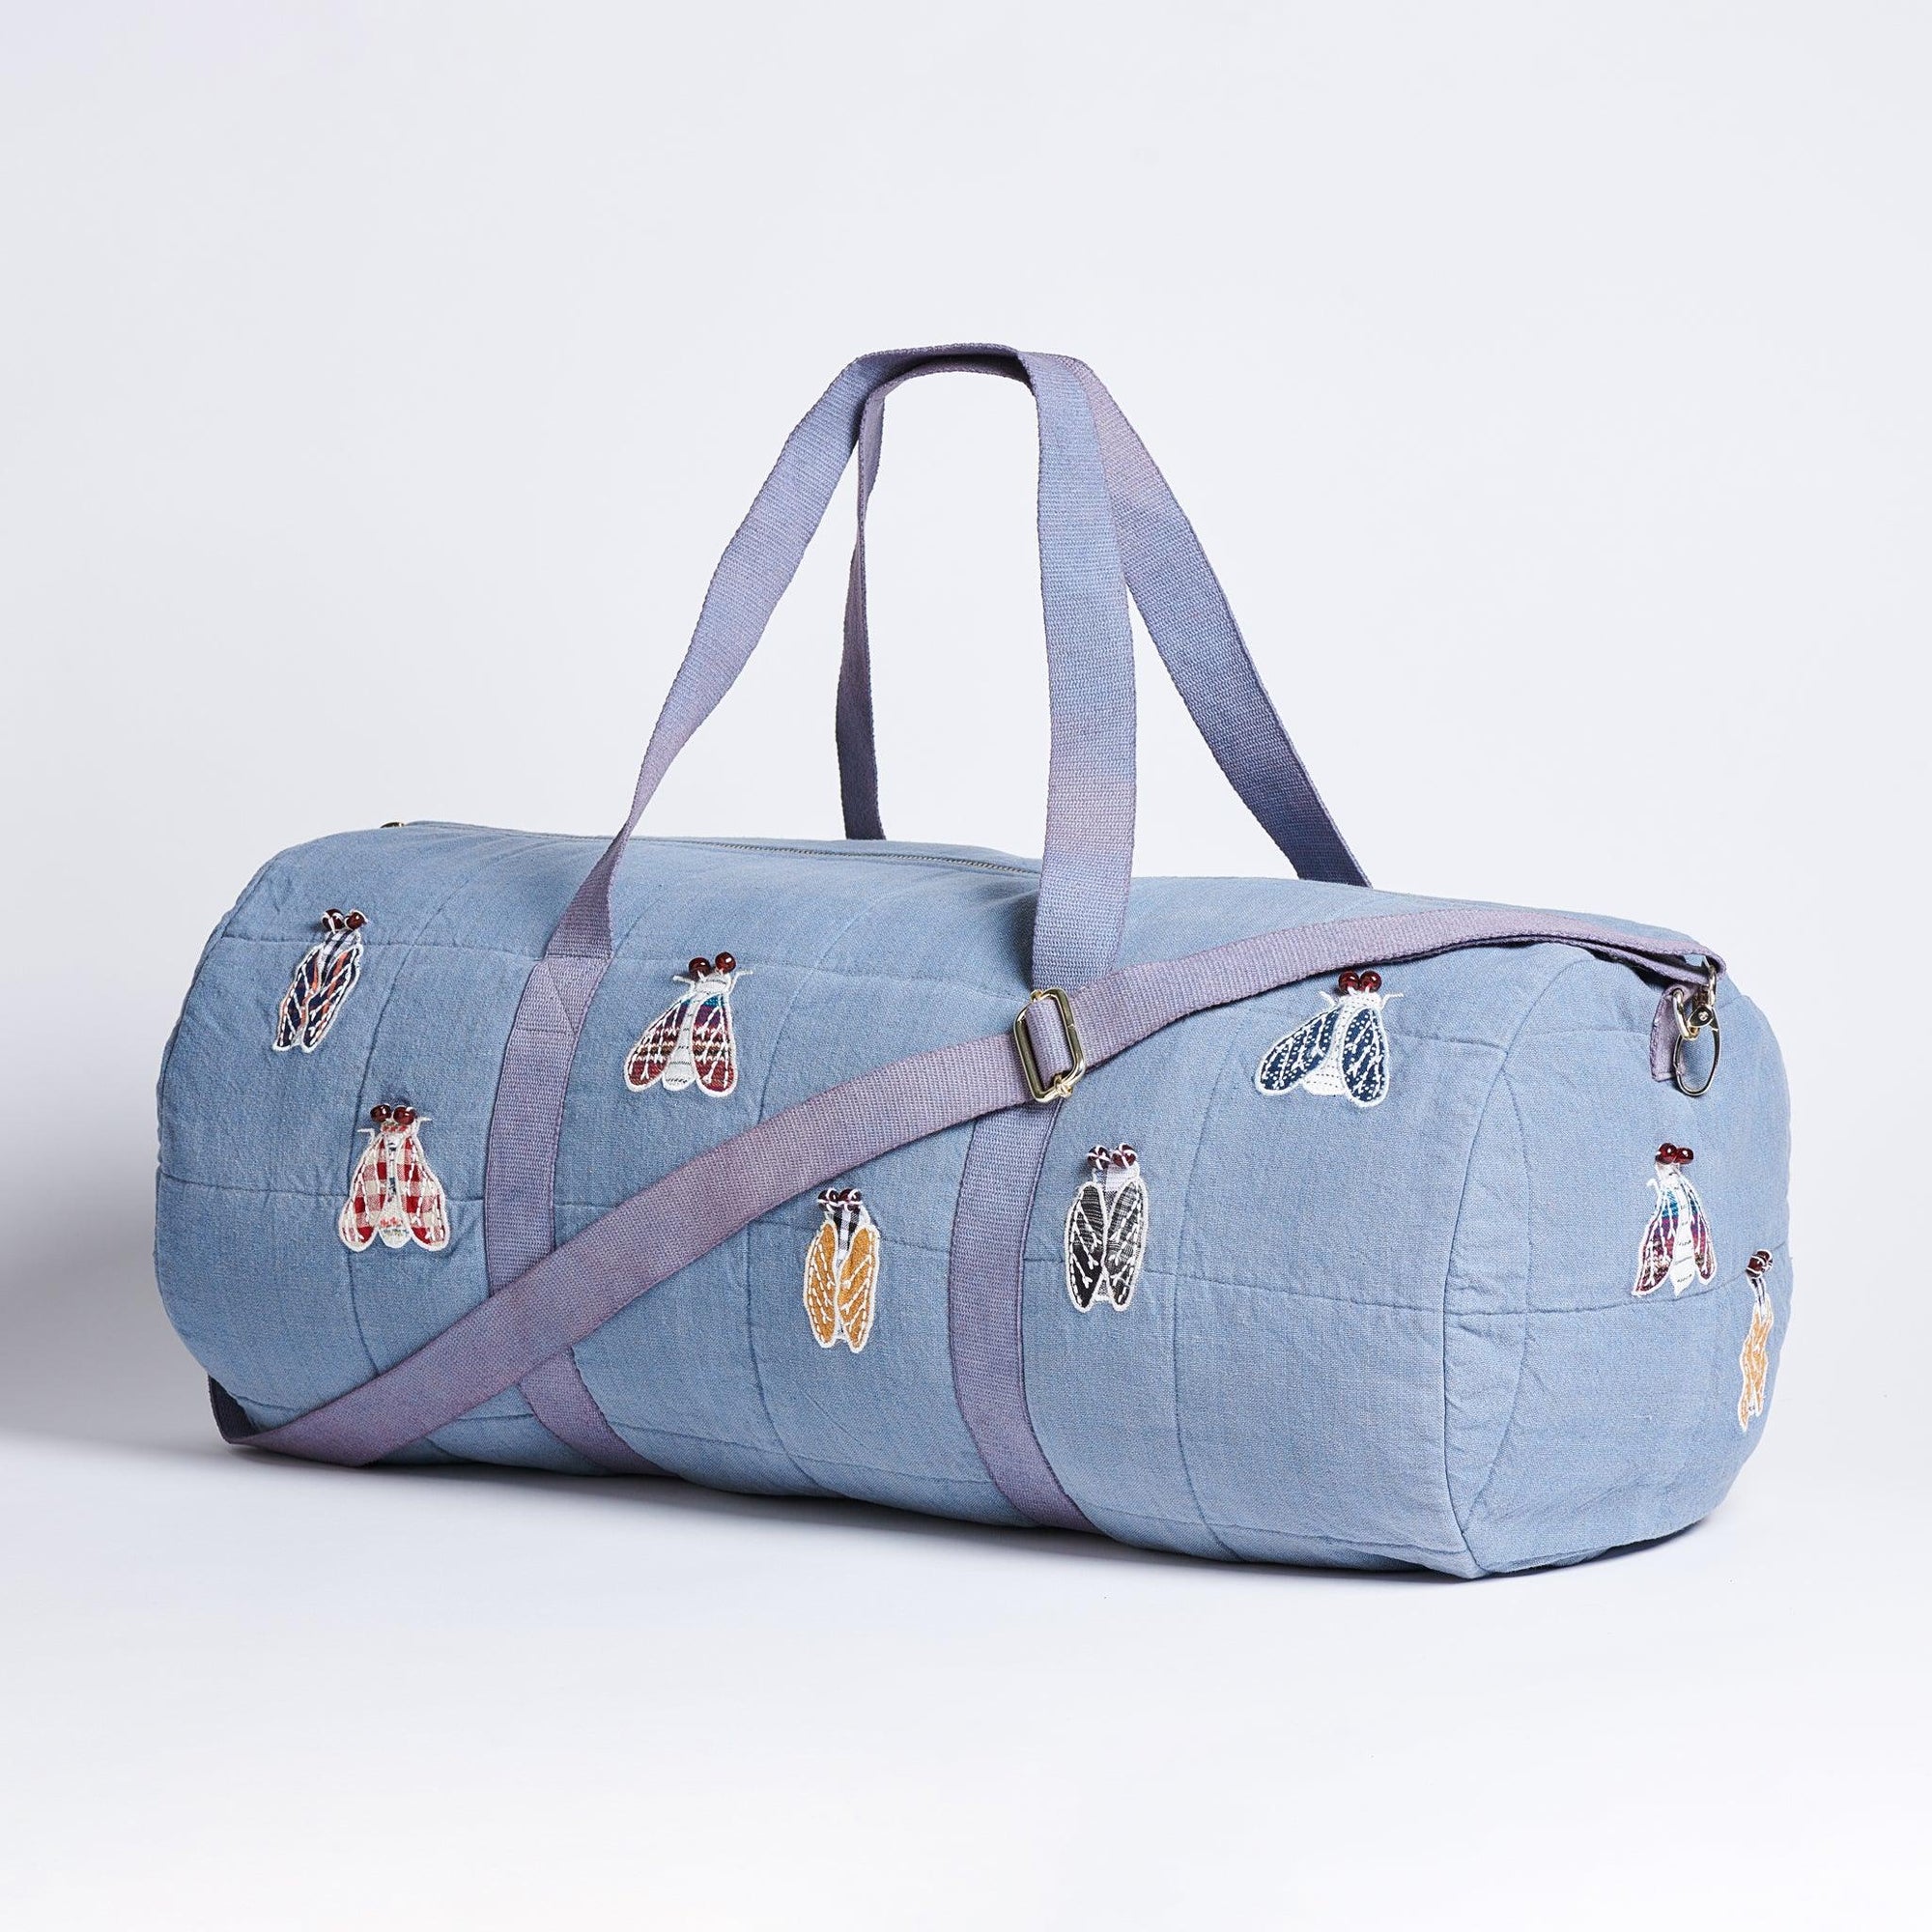 Light Blue Duffle with appliquéd cicada's on a white background.  